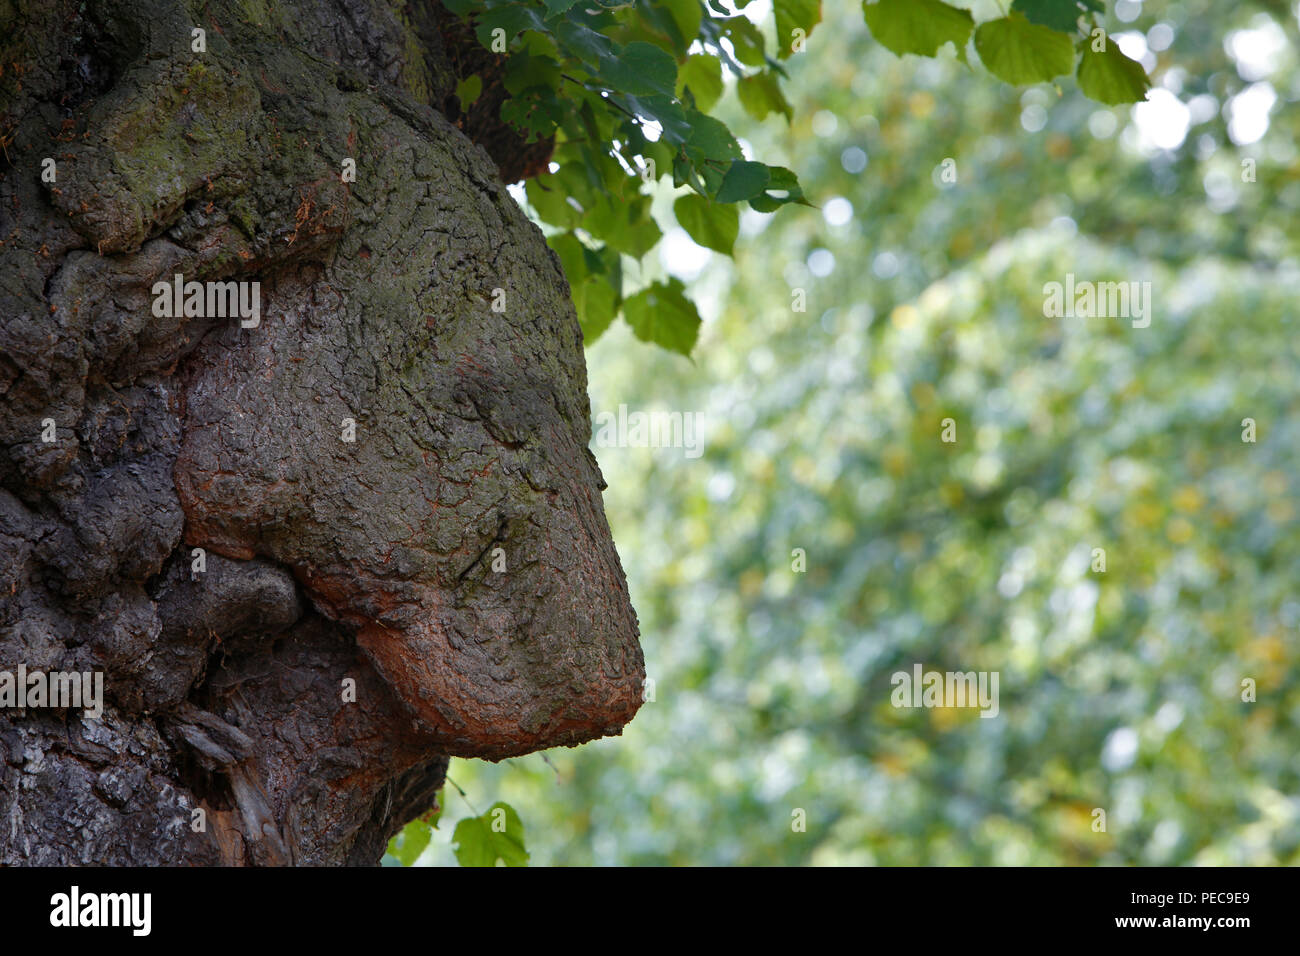 Curious tree attachment to a linden tree, sad lion figure, Biosphere Reserve Mittlere Elbe, Saxony-Anhalt, Germany Stock Photo